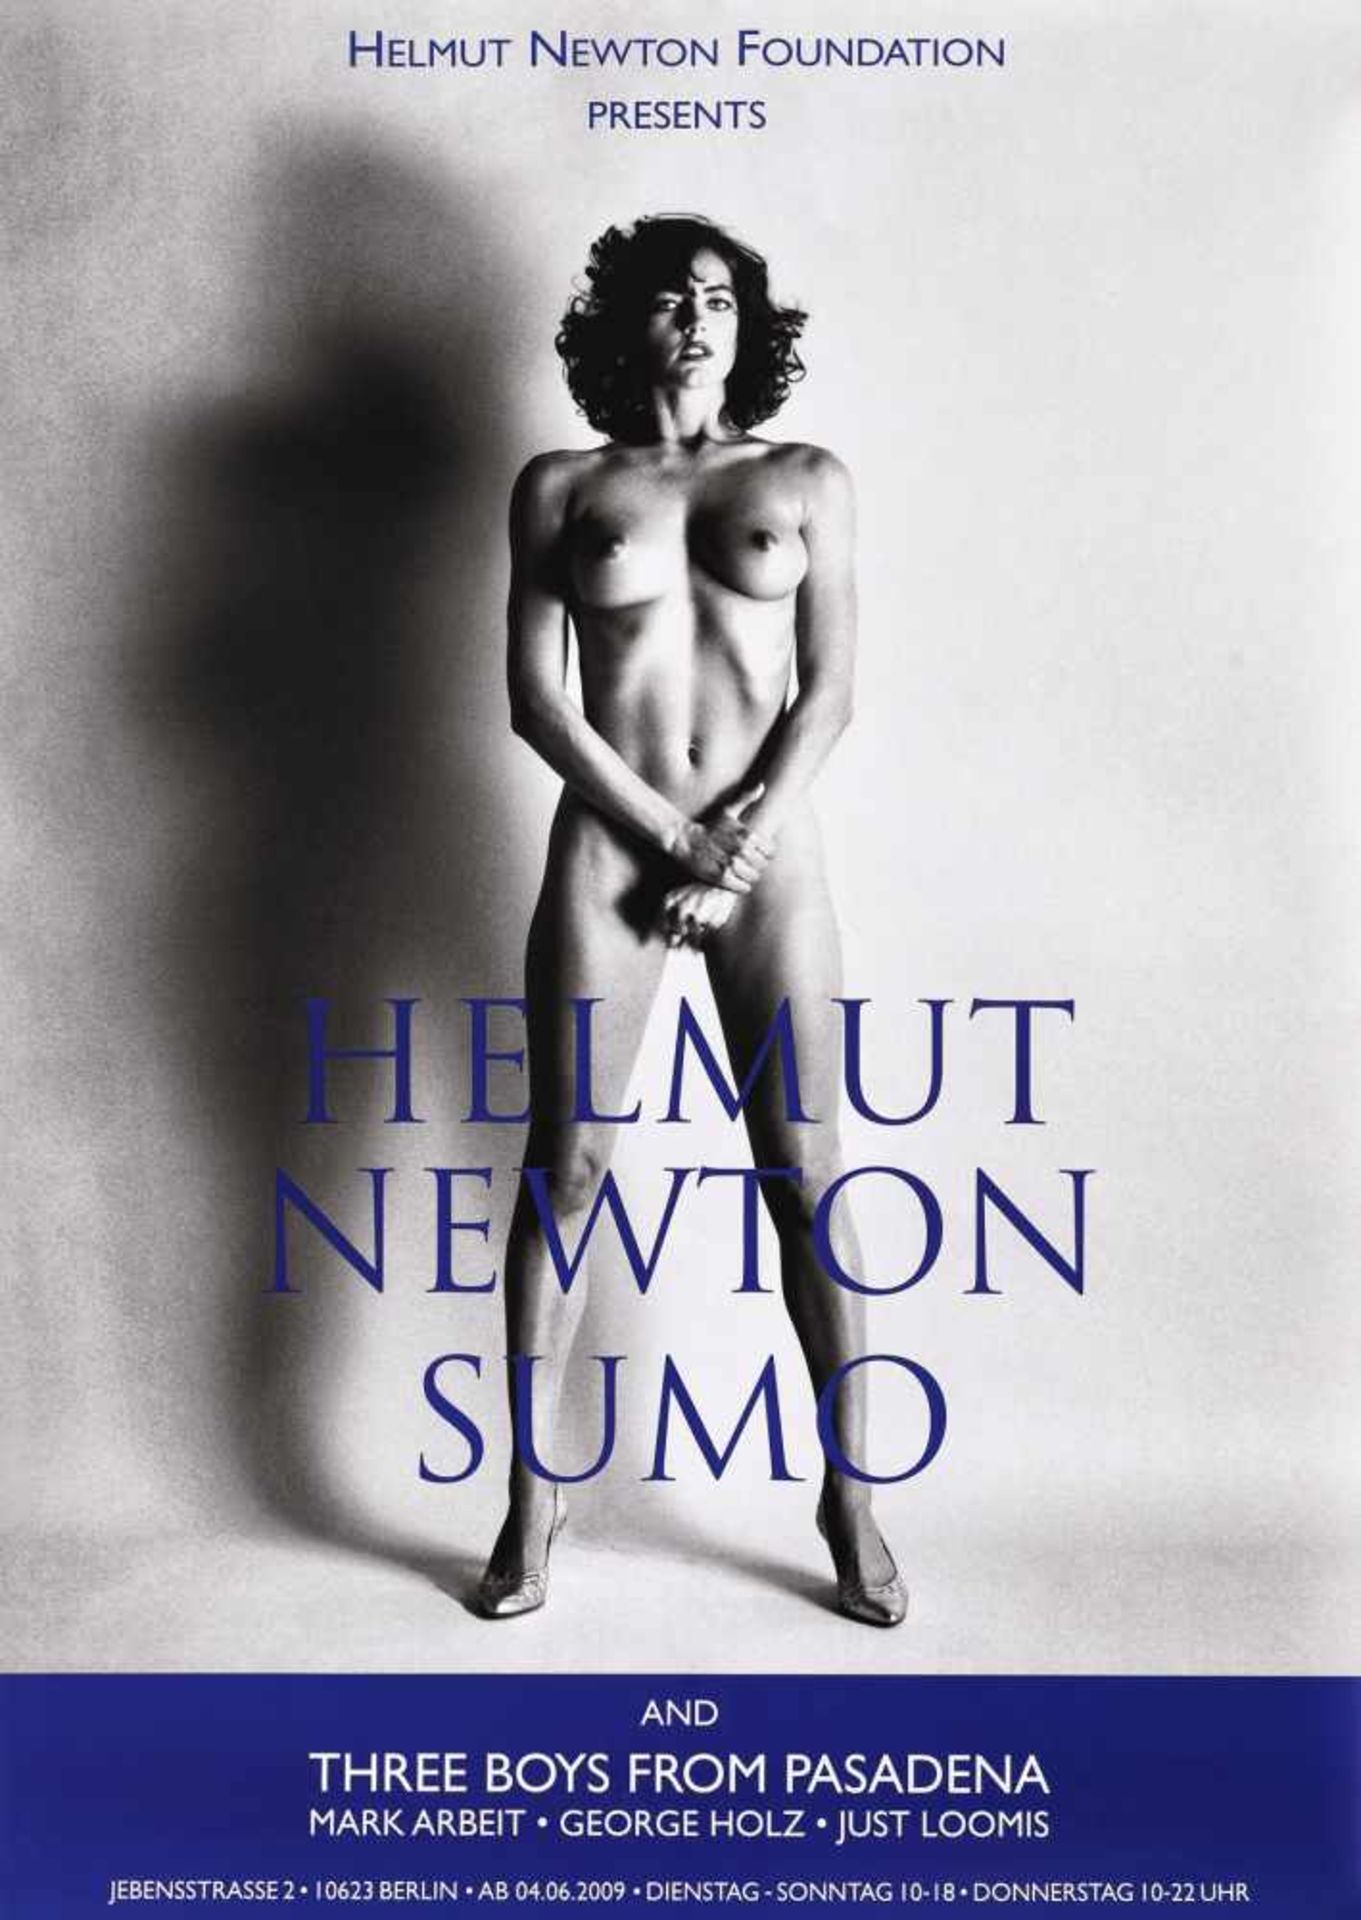 Helmut Newton, Mark Arbeit, George Holz and Just Loomis - exhibition poster, Berlin, 2009